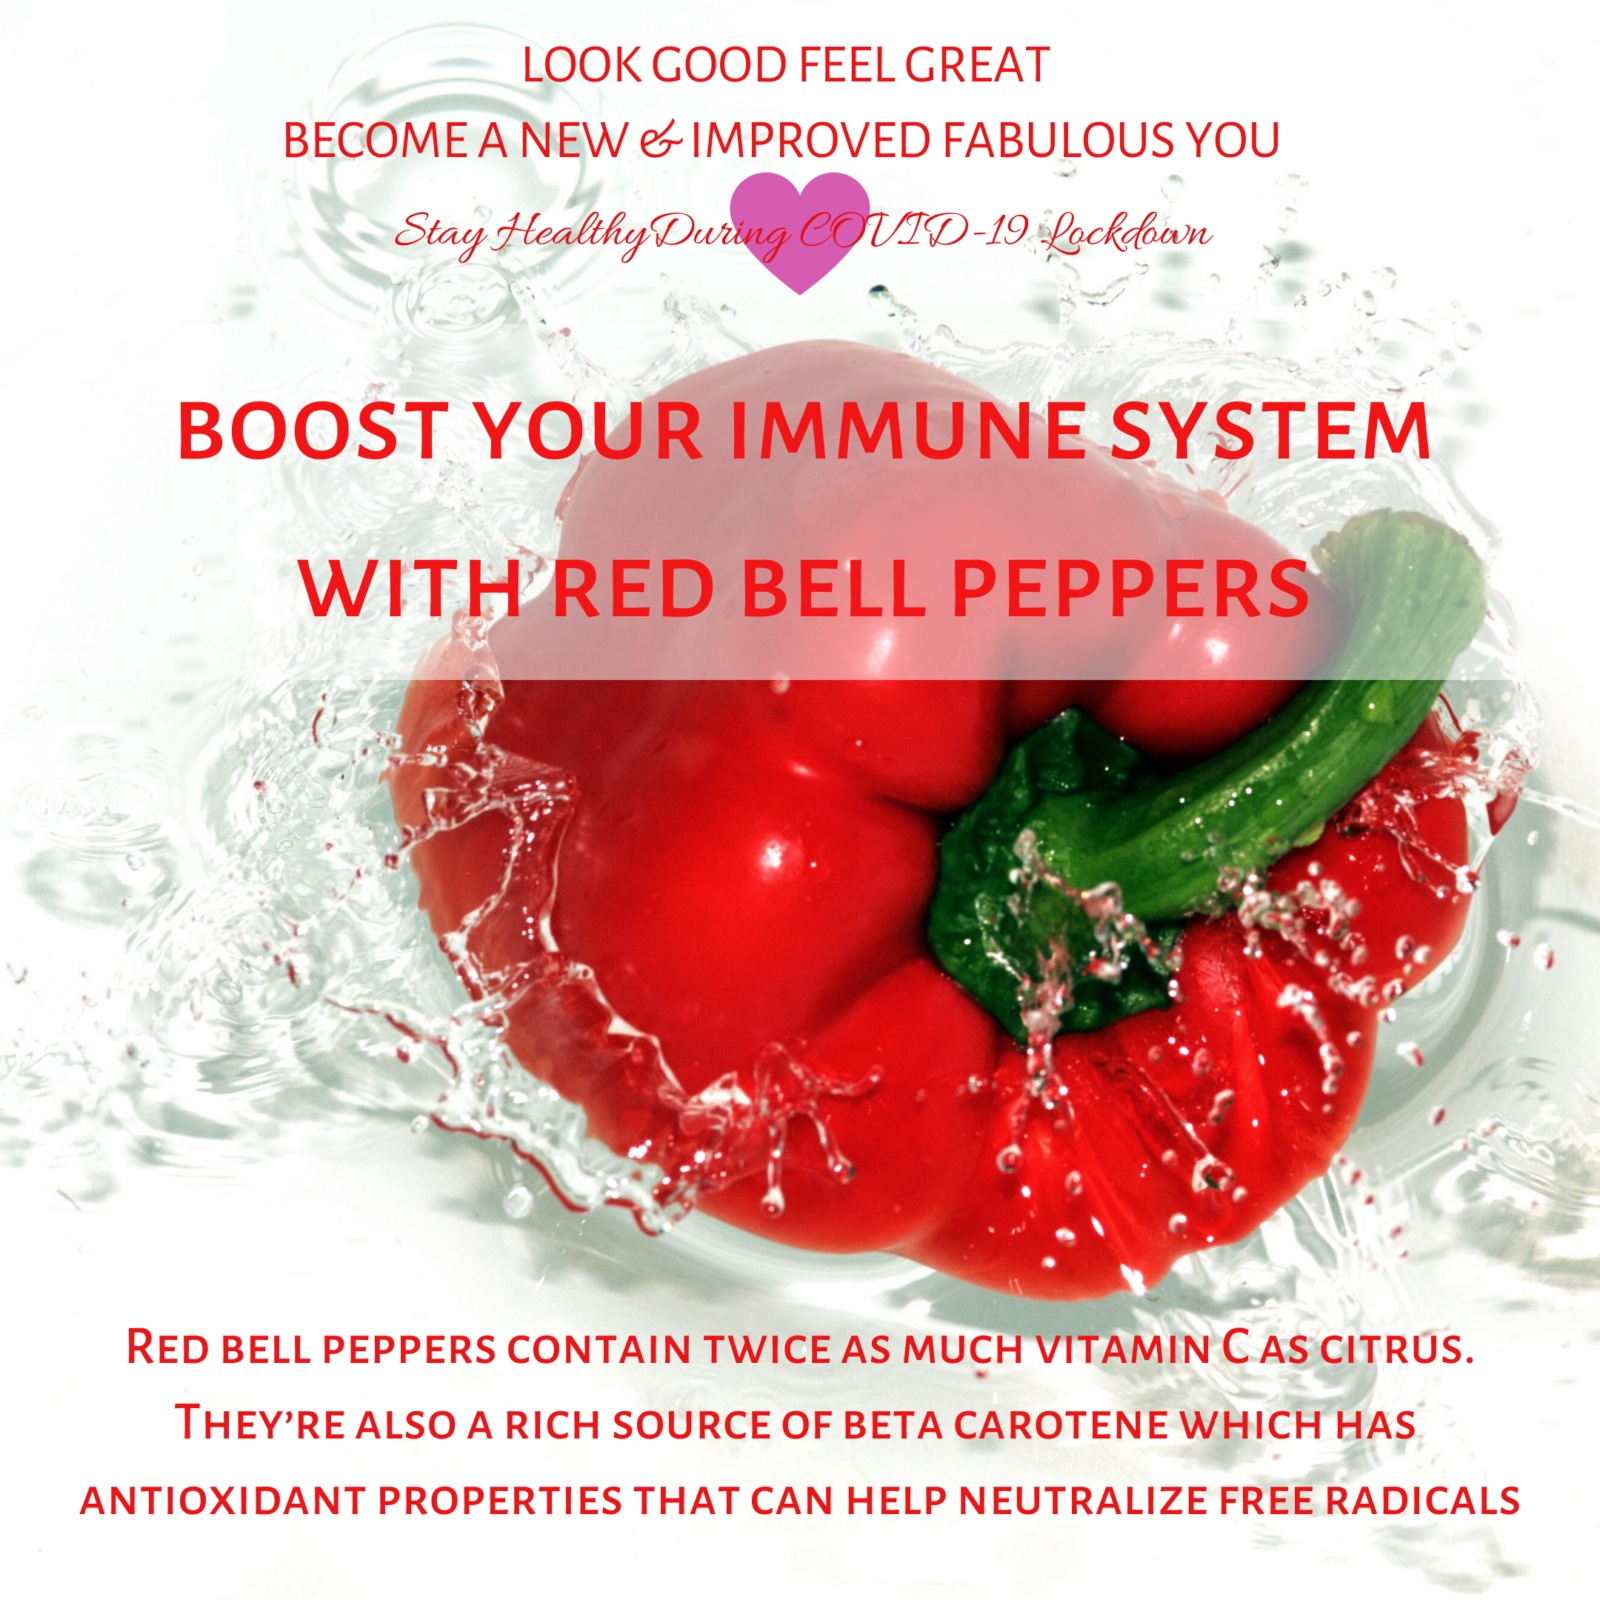 boost-immune-system-with-red-bell-pepper-it-contains-vitamin-c-rich-in-beta-carotene-which-has-antioxidant-properties-to-help-neutralize-free-radicals-good-looks-bible-glb-by-jehan-mir